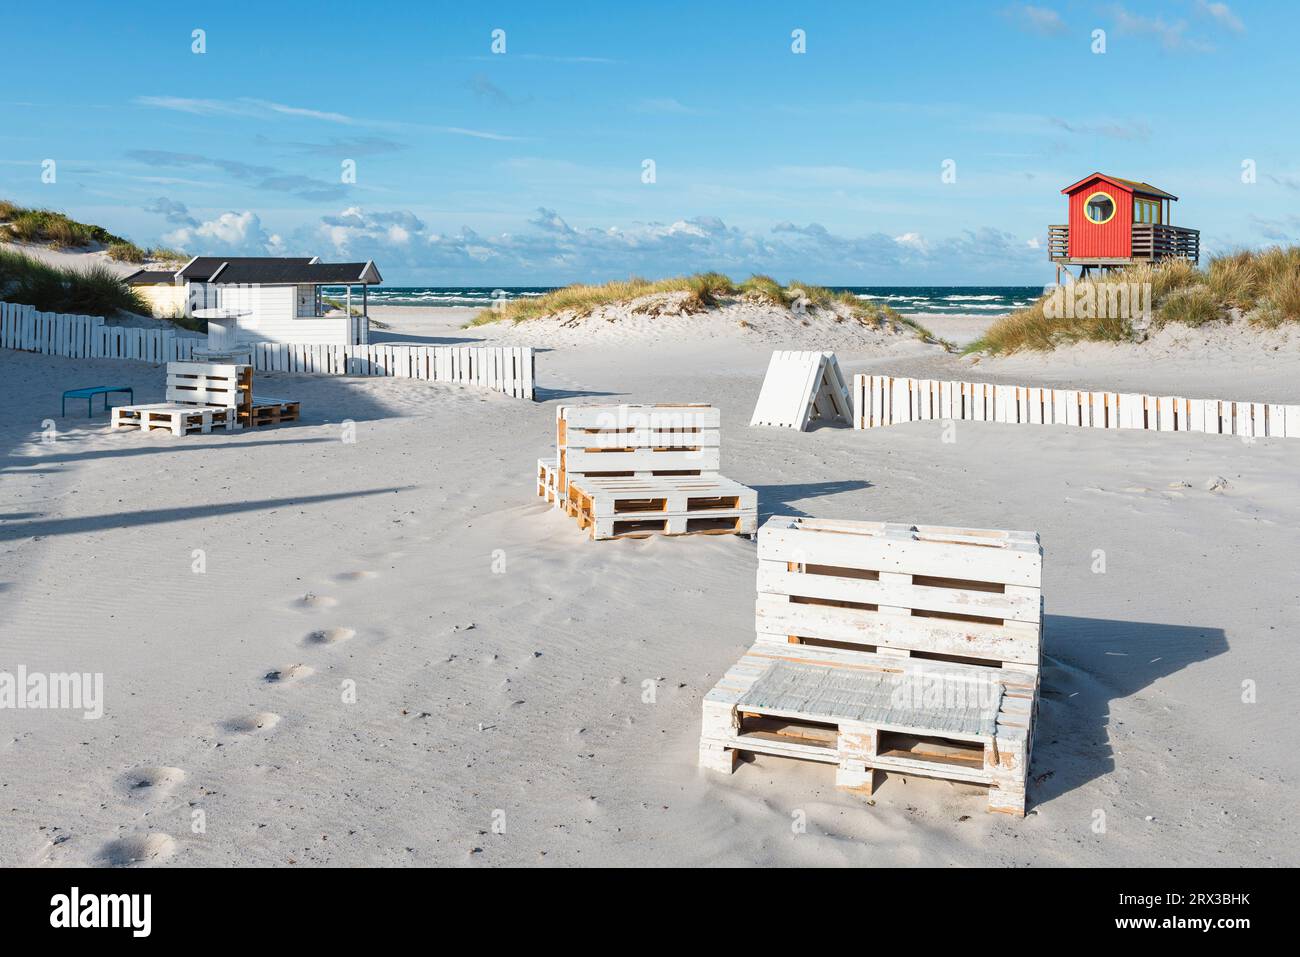 Lifeguard observation tower at the beach bar in the sand dunes on Skanör med Falsterbo beach in the morning sun, Skåne, Sweden Stock Photo